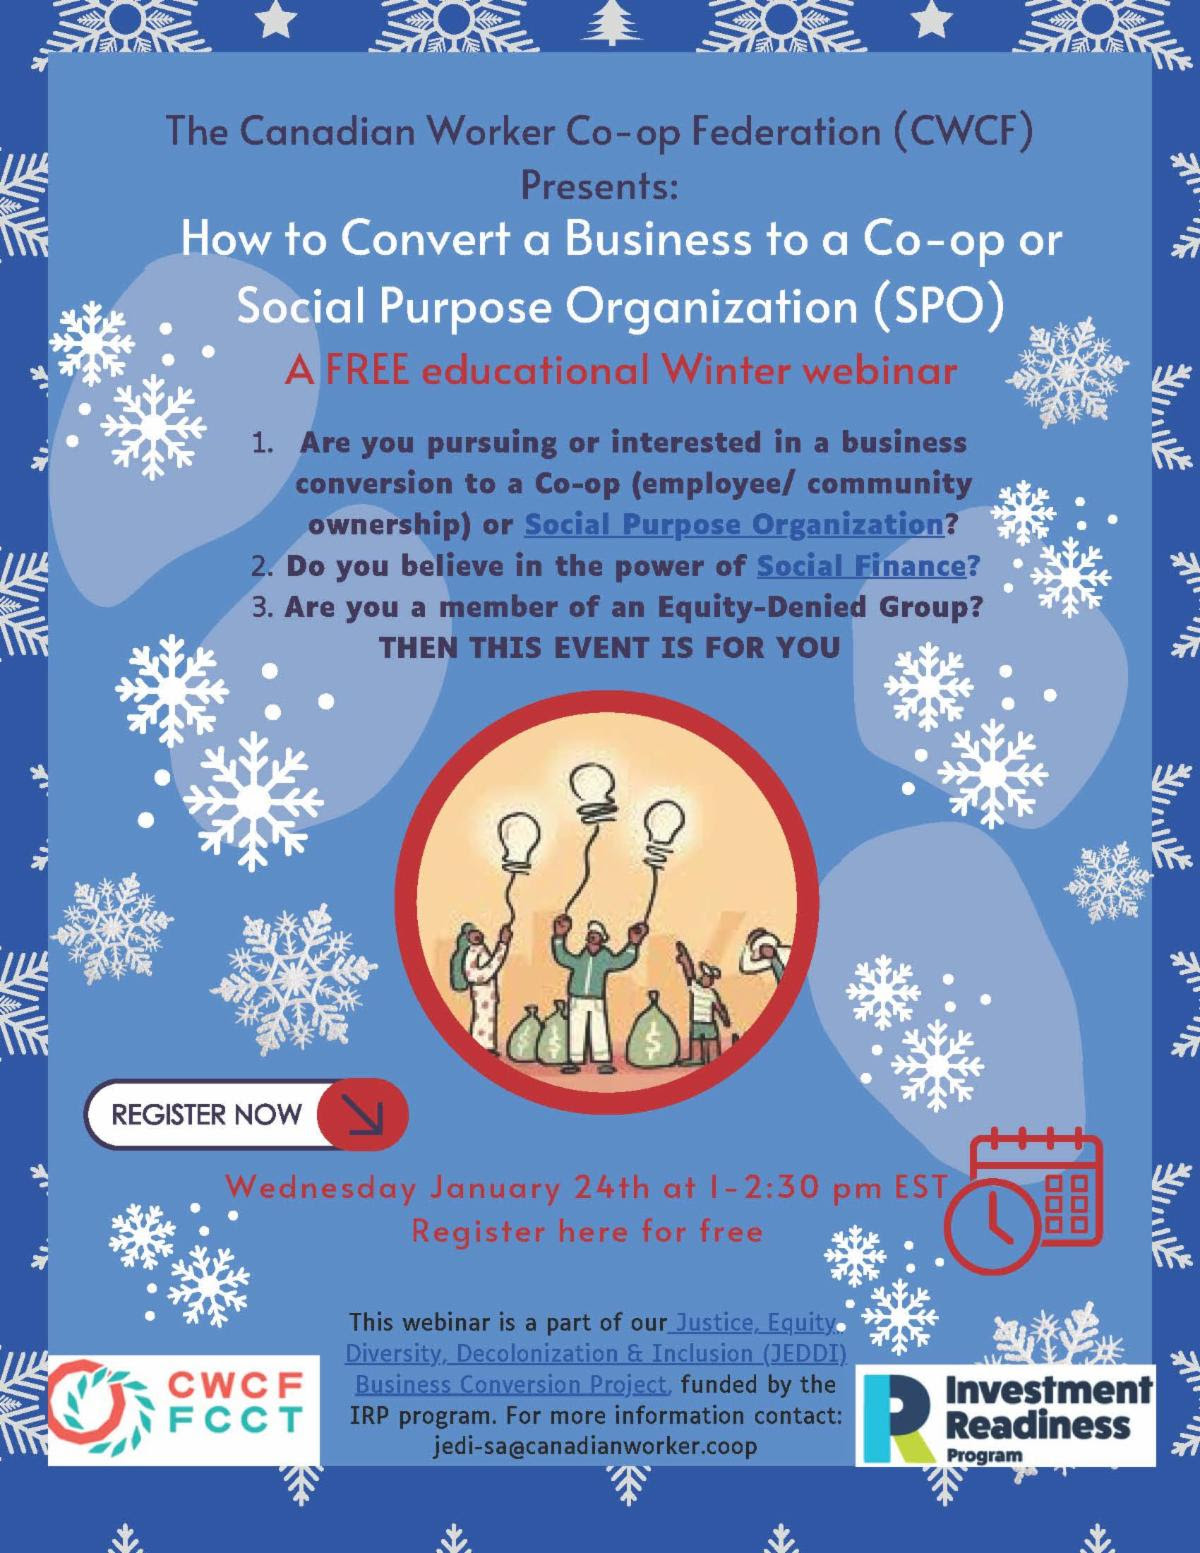 How to Convert a Business to a Co-op or Social Purpose Organization (SPO) - A FREE educational Winter webinar. 1. Are you pursuing or interested in a business conversion to a Co-op (employee/ community ownership) or SPO? 2. Do you believe in the power of Social Finance 3. Are you a member of an Equity-Denied Group? THEN THIS EVENT IS FOR YOU Wednesday January 24th at 1-2:30 pm EST.